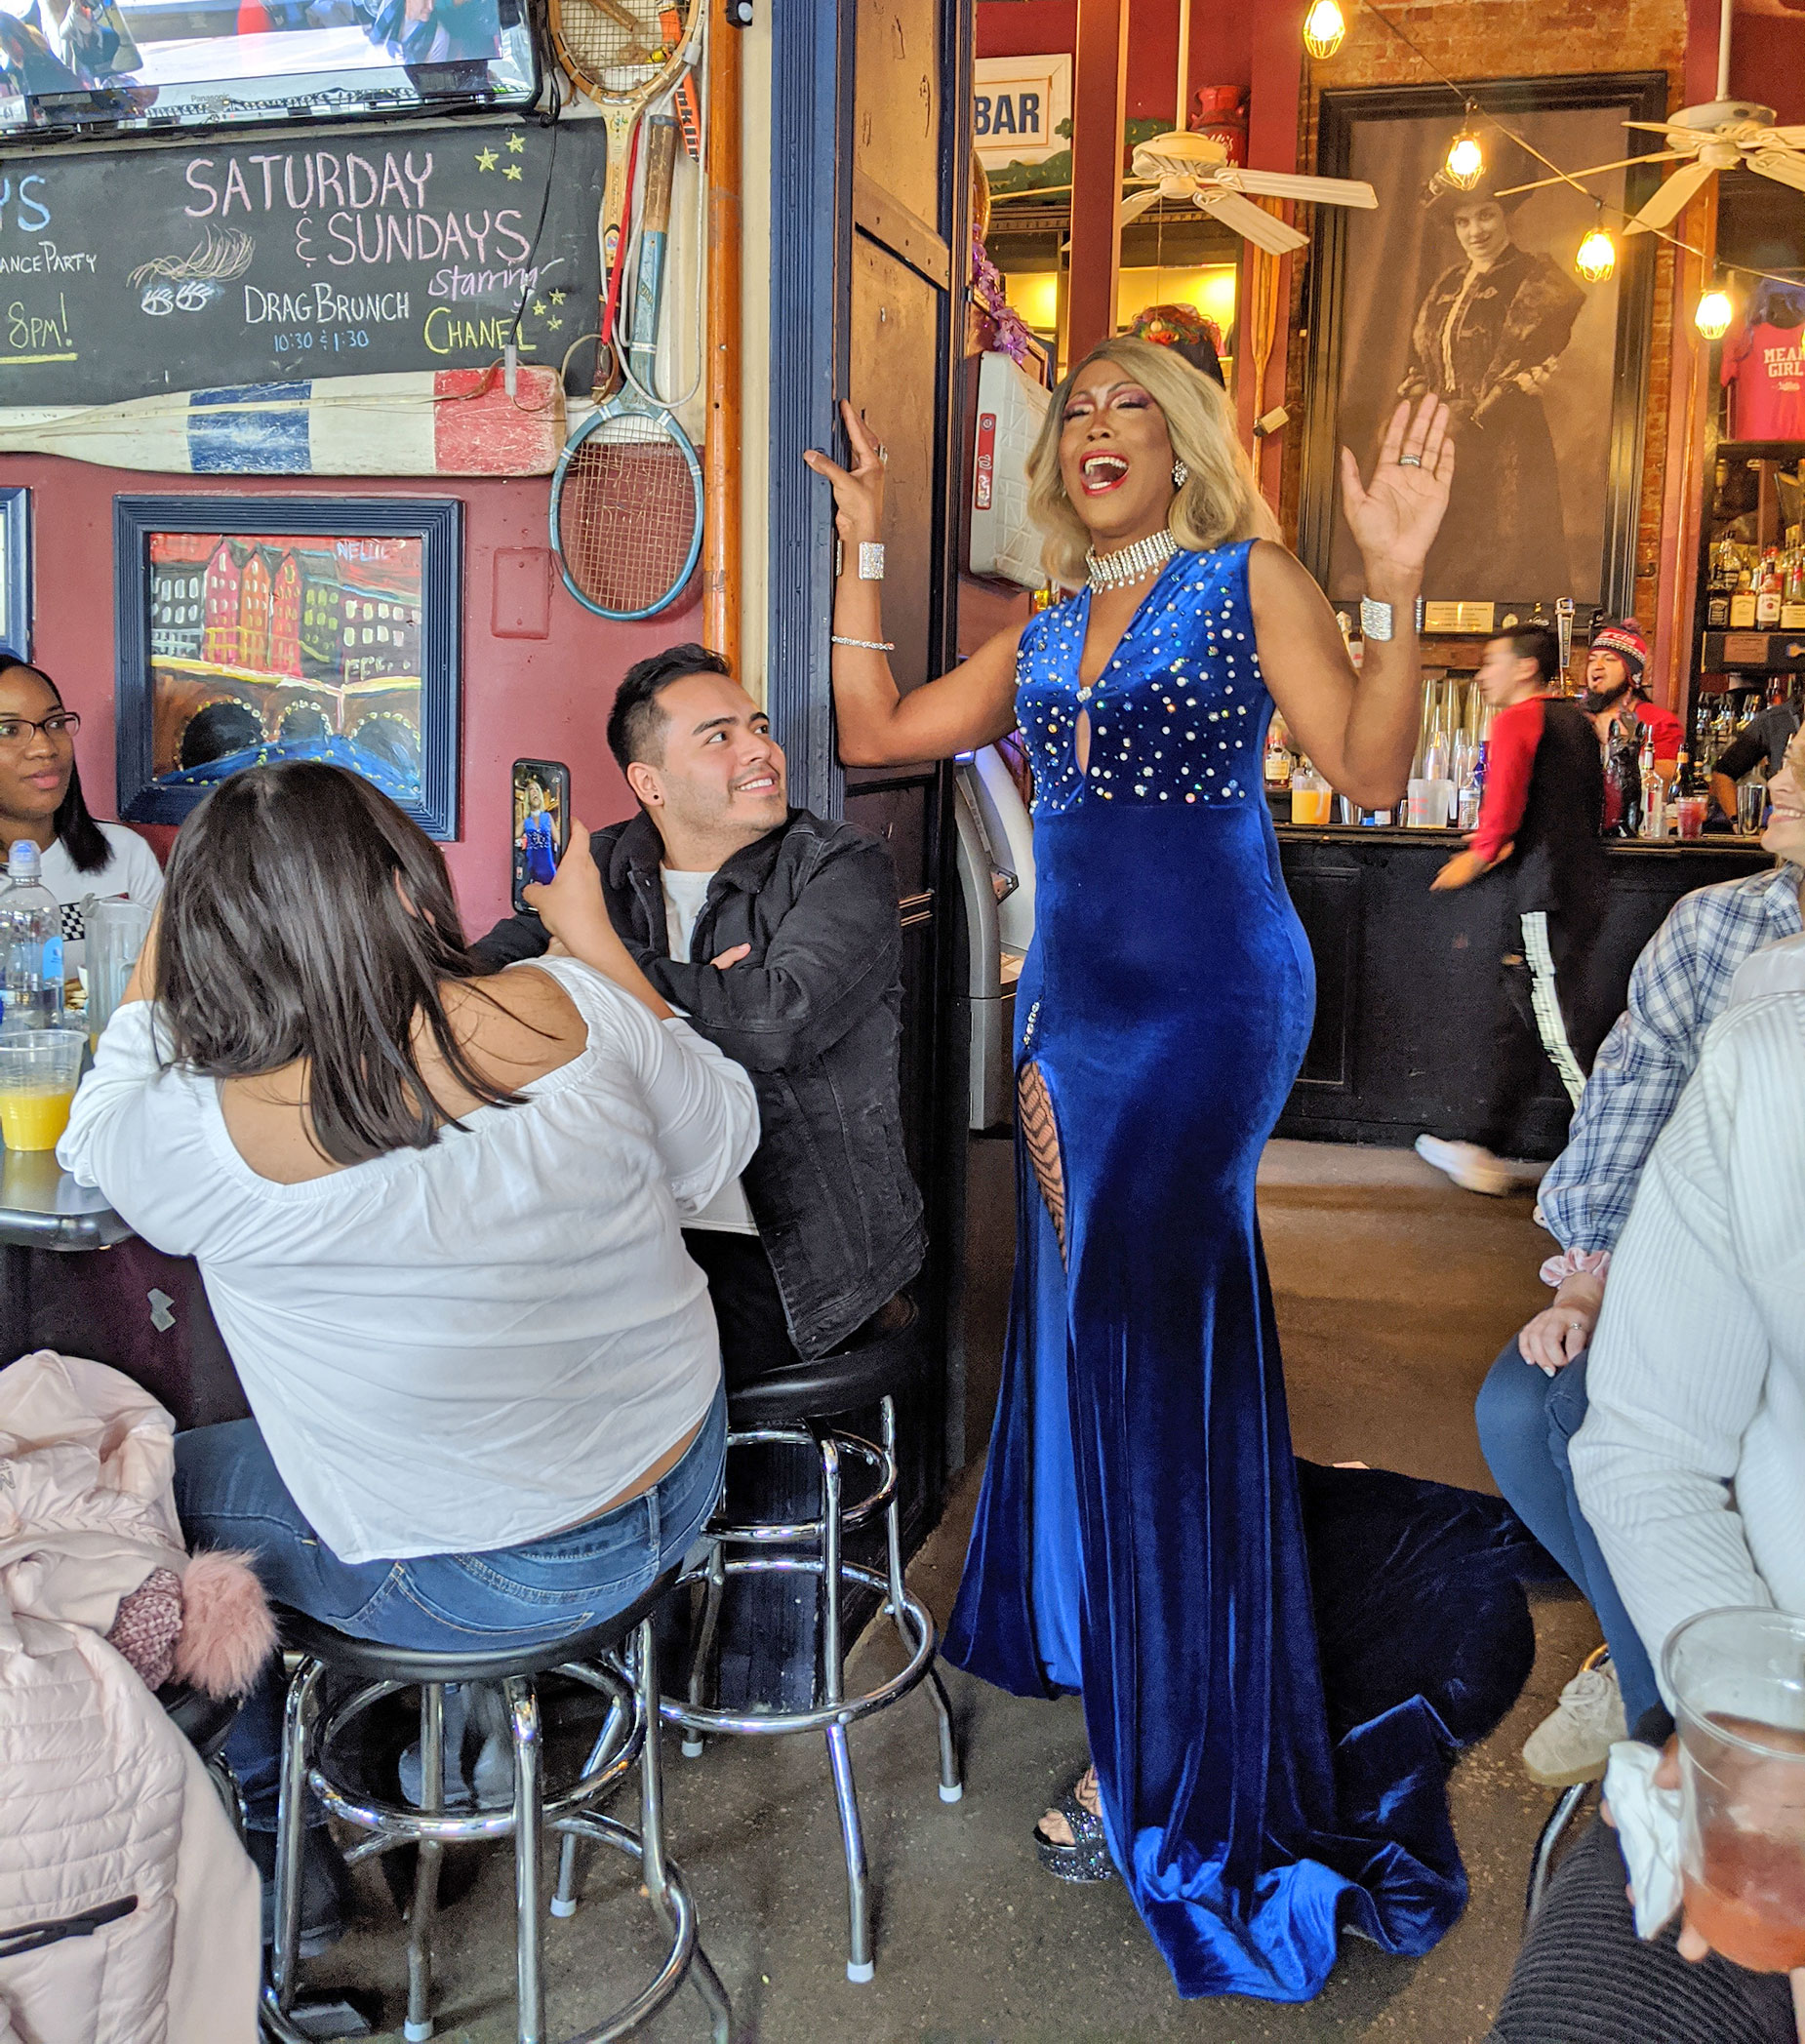 Drag queen Sapphire Ardwick Ardmore-Blue performing at Nellies Brunch.